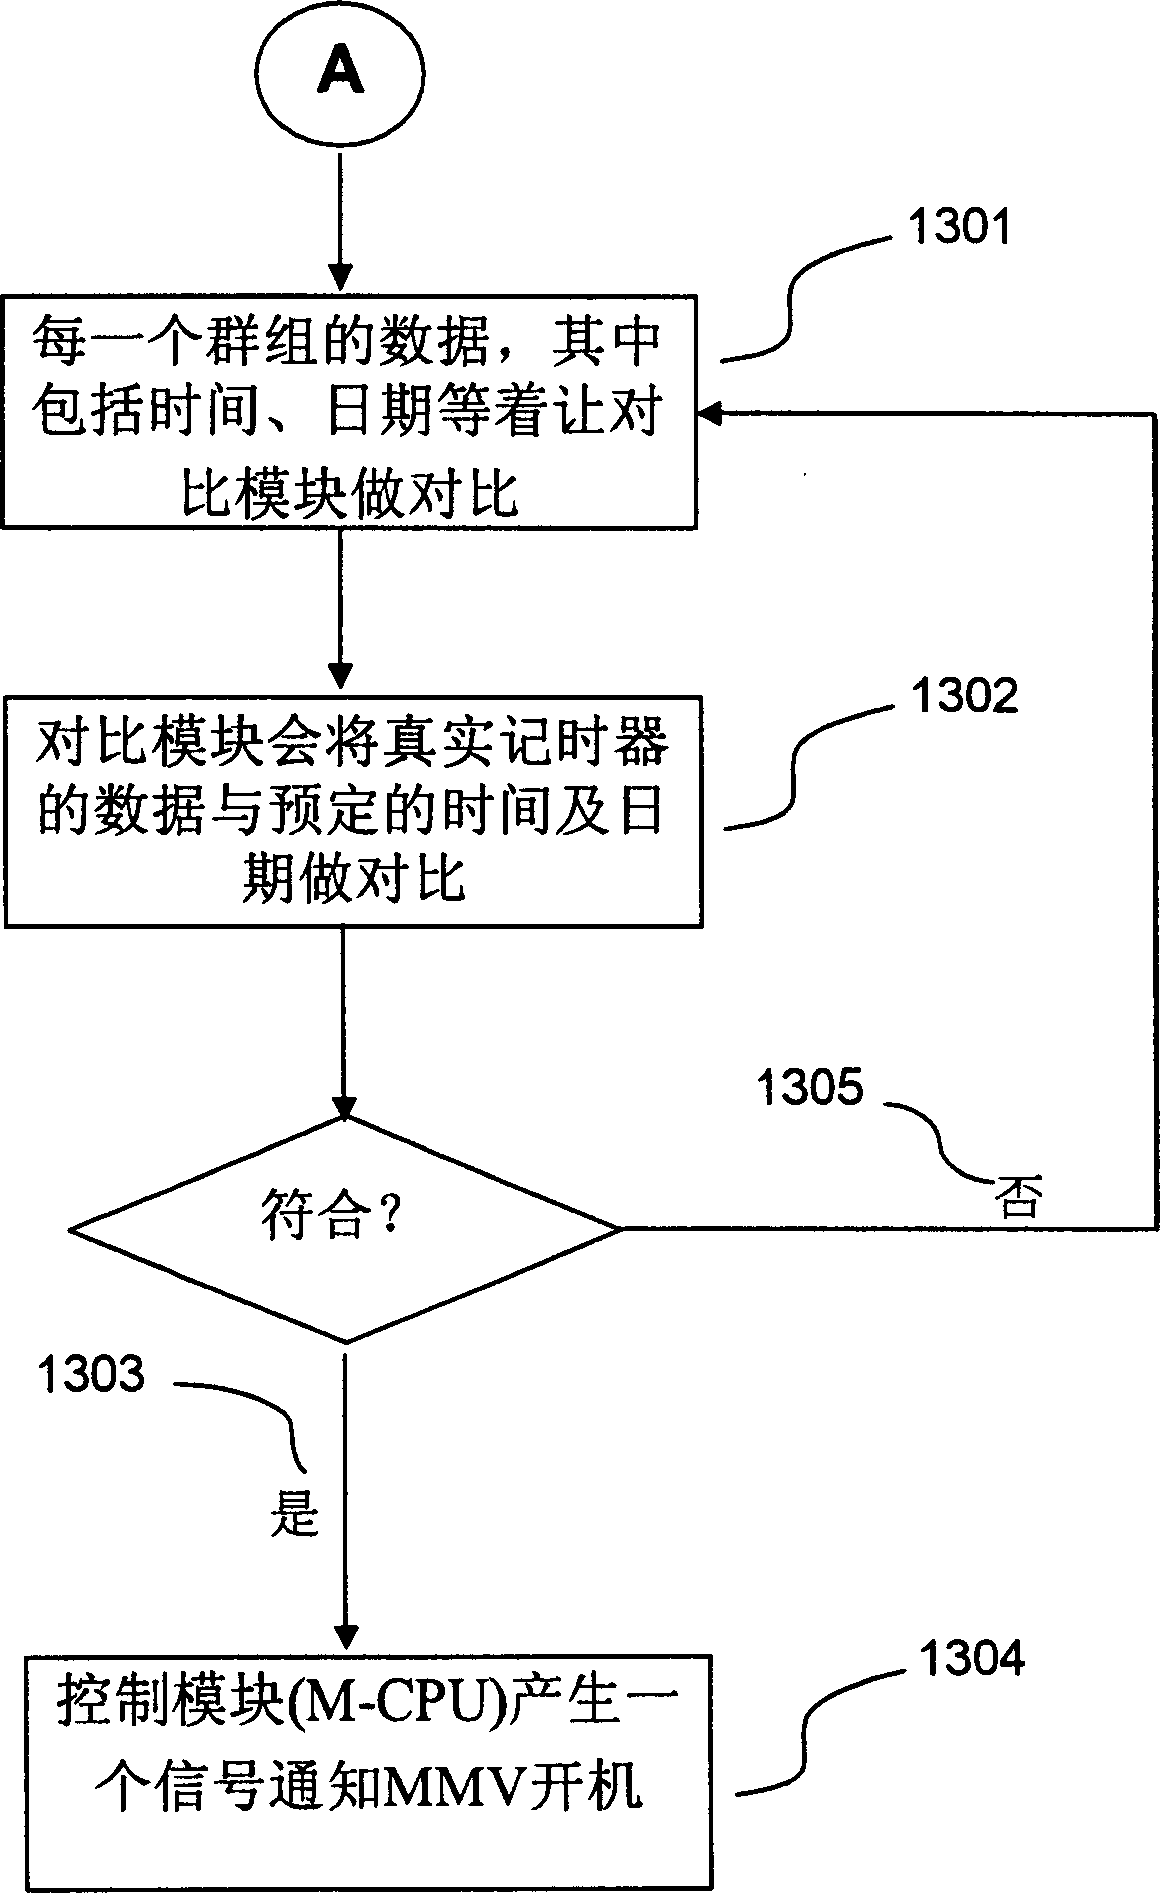 A multimedia alarm bell presenting method and apparatus thereof